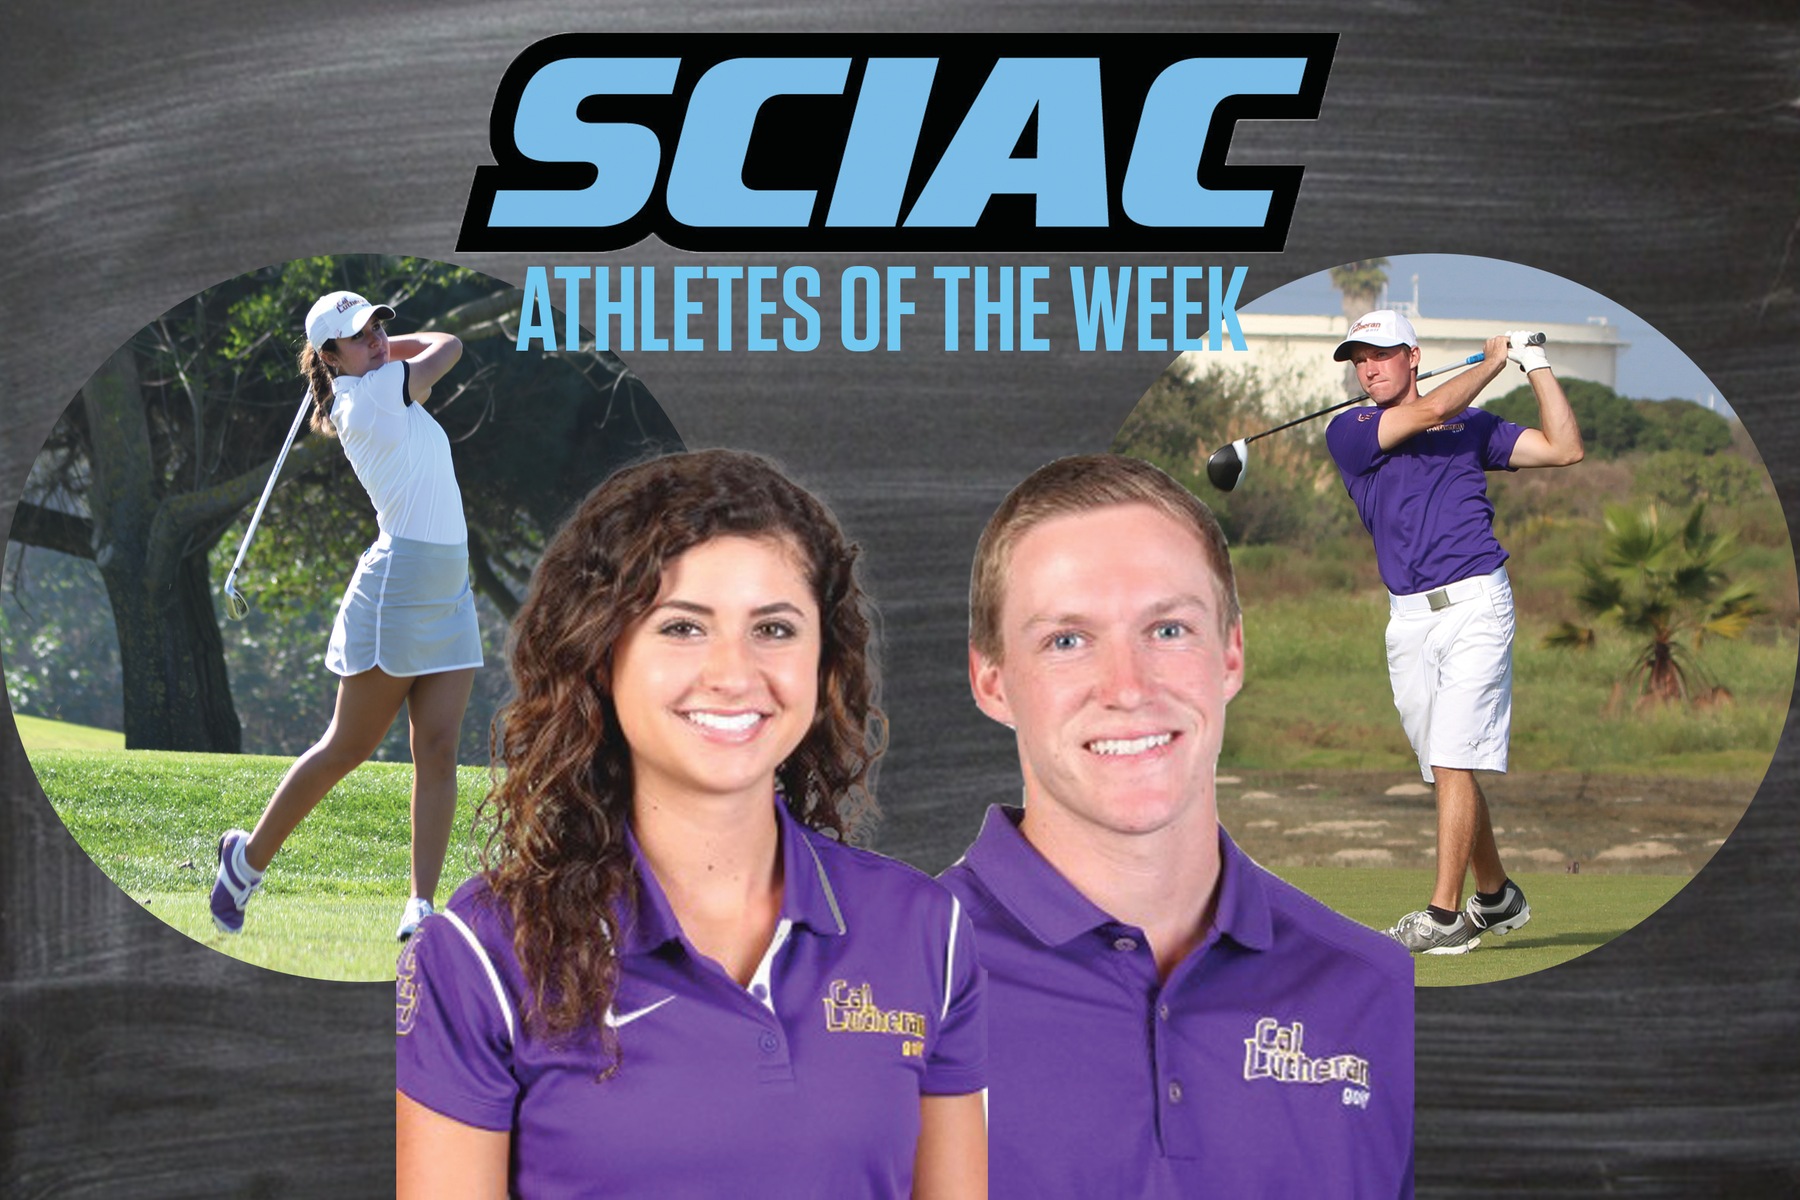 Ferrier and McCardell Earn SCIAC AOW Honors